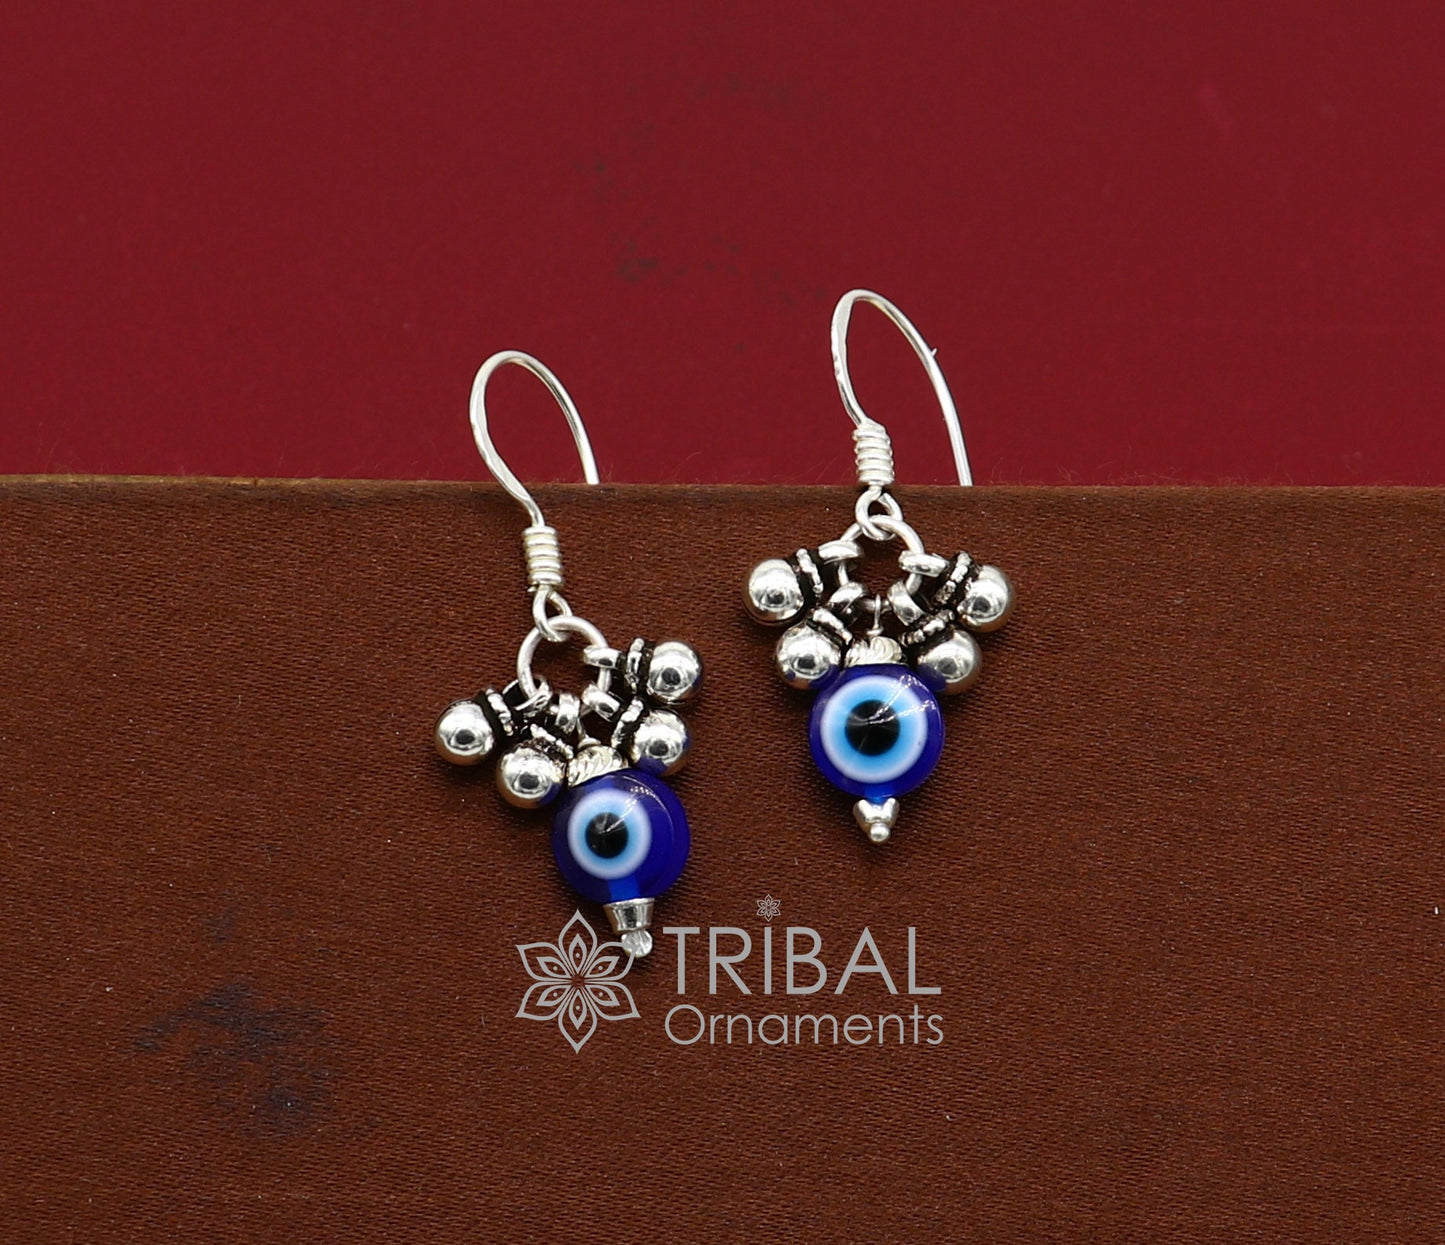 925 Sterling silver small evil eye handmade hoops earring amazing customized drop dangle evil eyes jewelry for girl's s1165 - TRIBAL ORNAMENTS